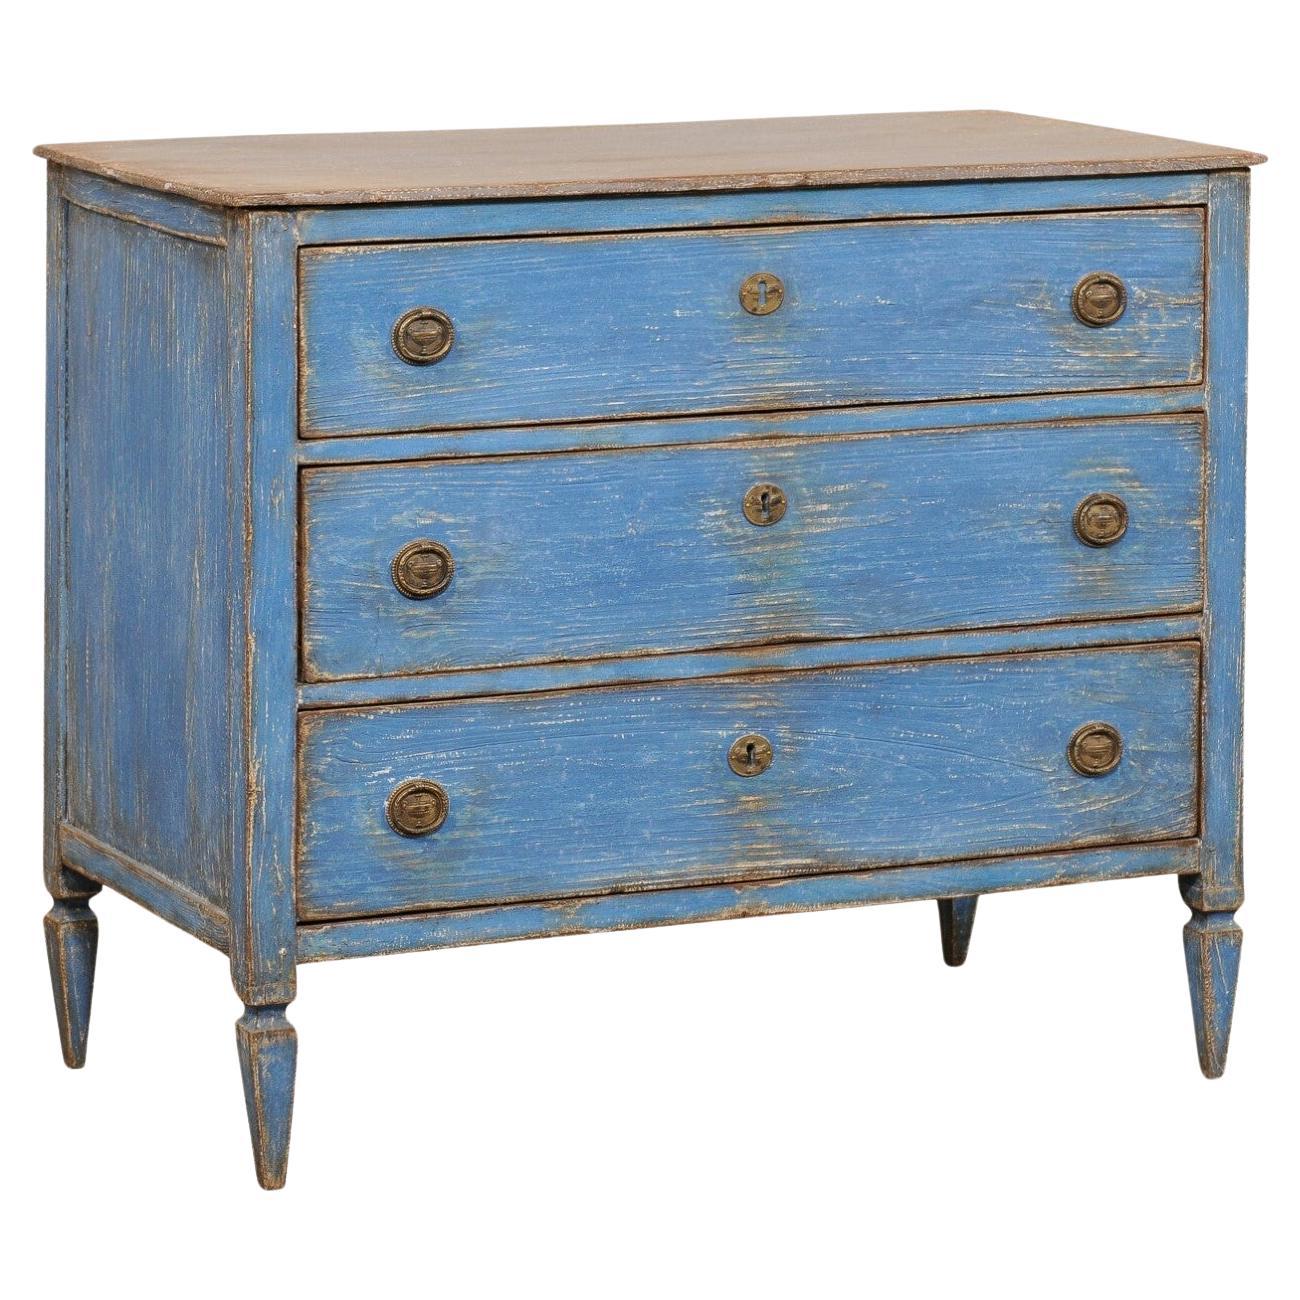 French Early 20th C. Wooden 3-Drawer Chest in Blue